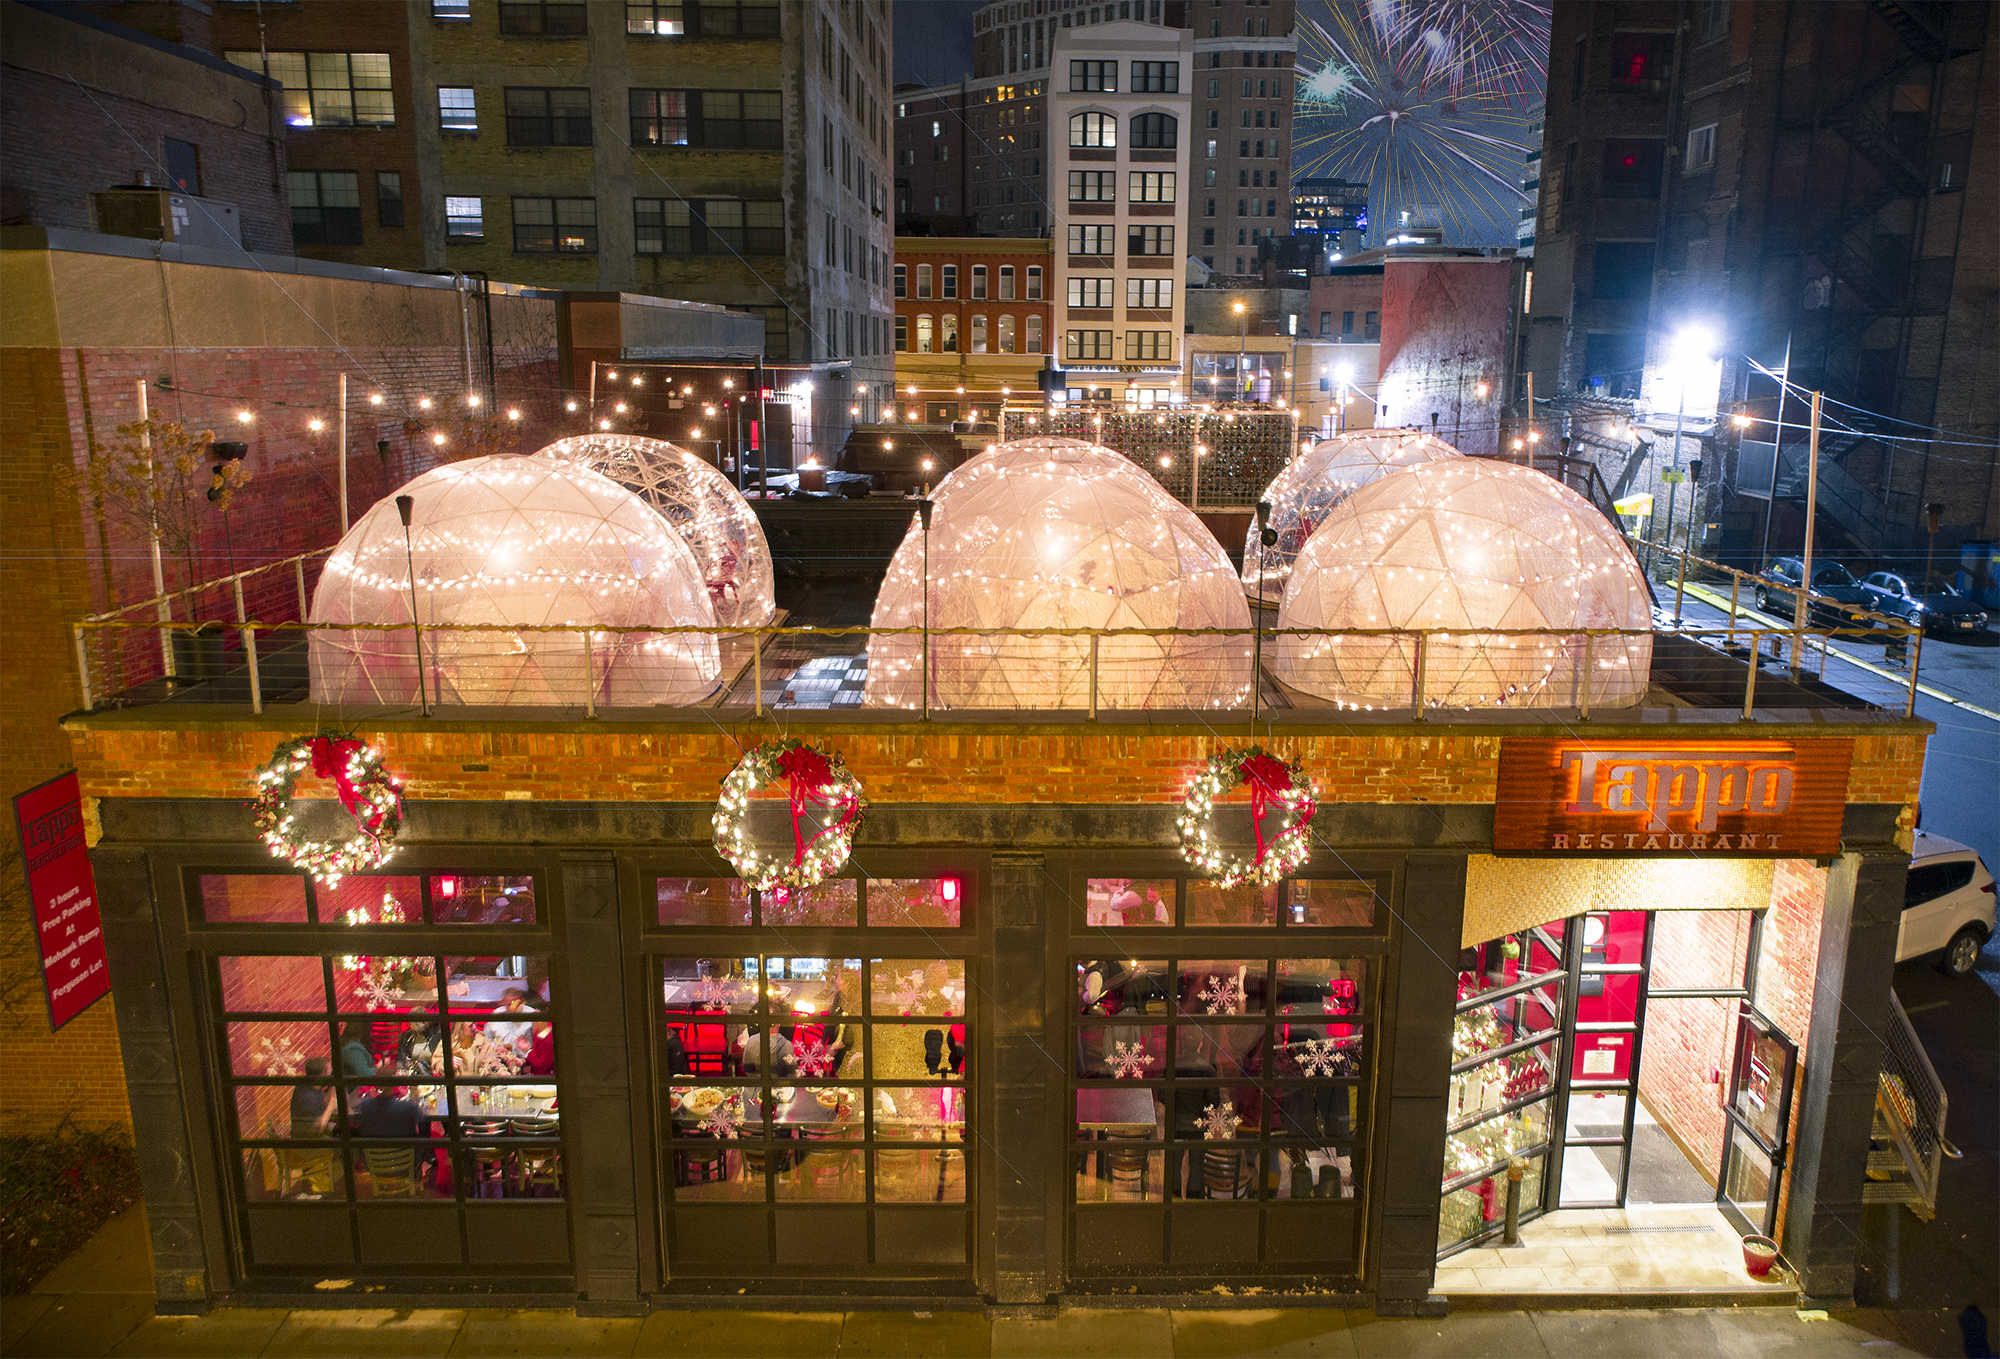 Dine in a Snow Globe on Top of Tappo Restaurant - February- March, 2020